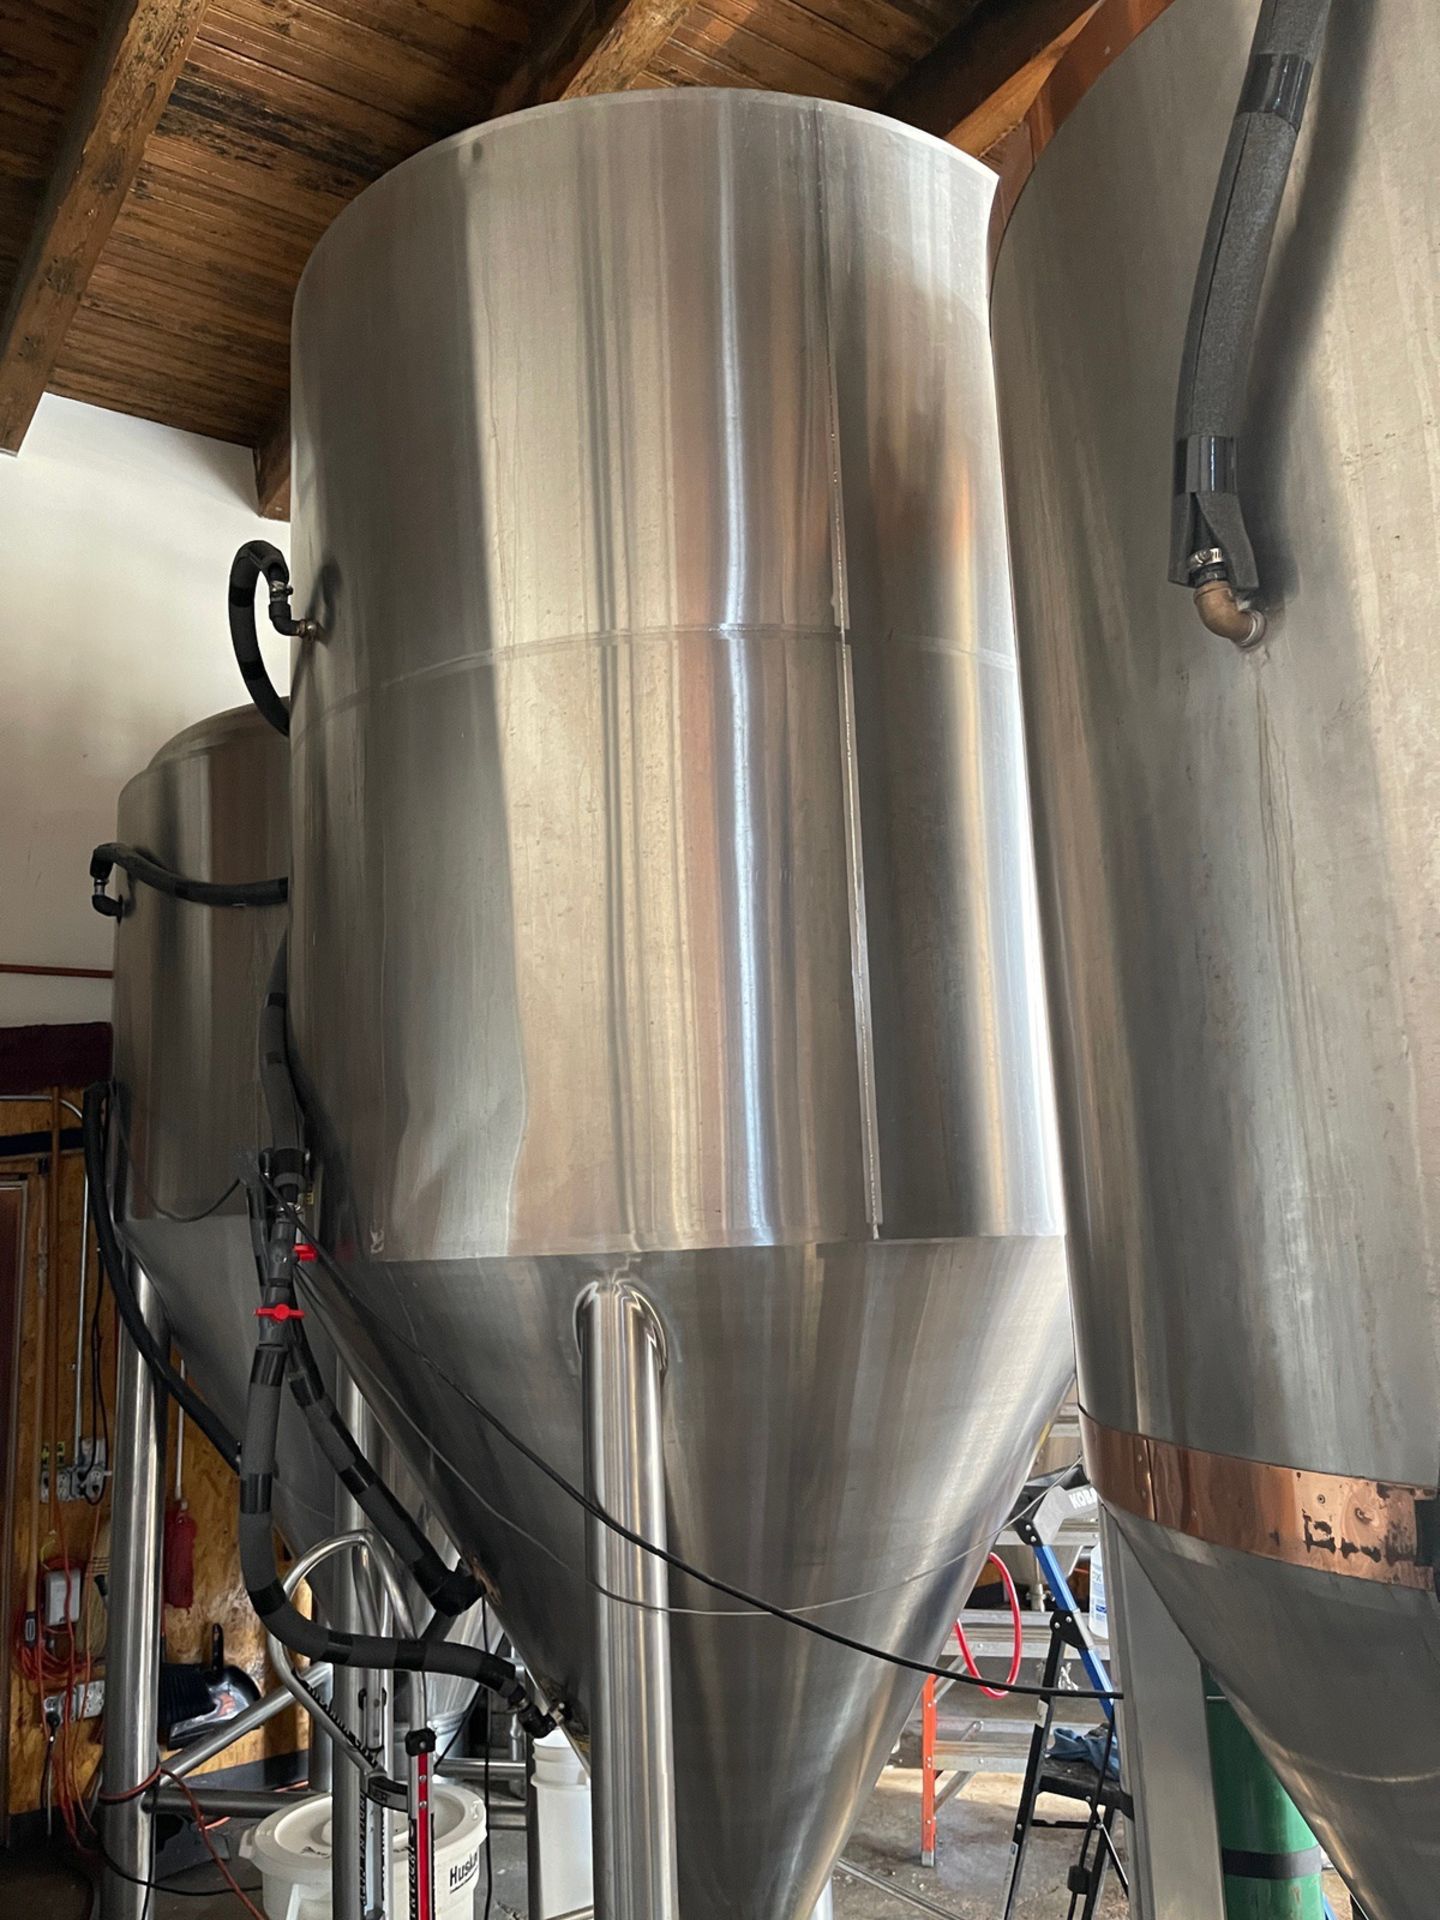 Century Manufacturing 30 BBL Stainless Steel Fermentation Tank (Approx: 5' x 13') | Rig Fee $1000 - Image 3 of 3